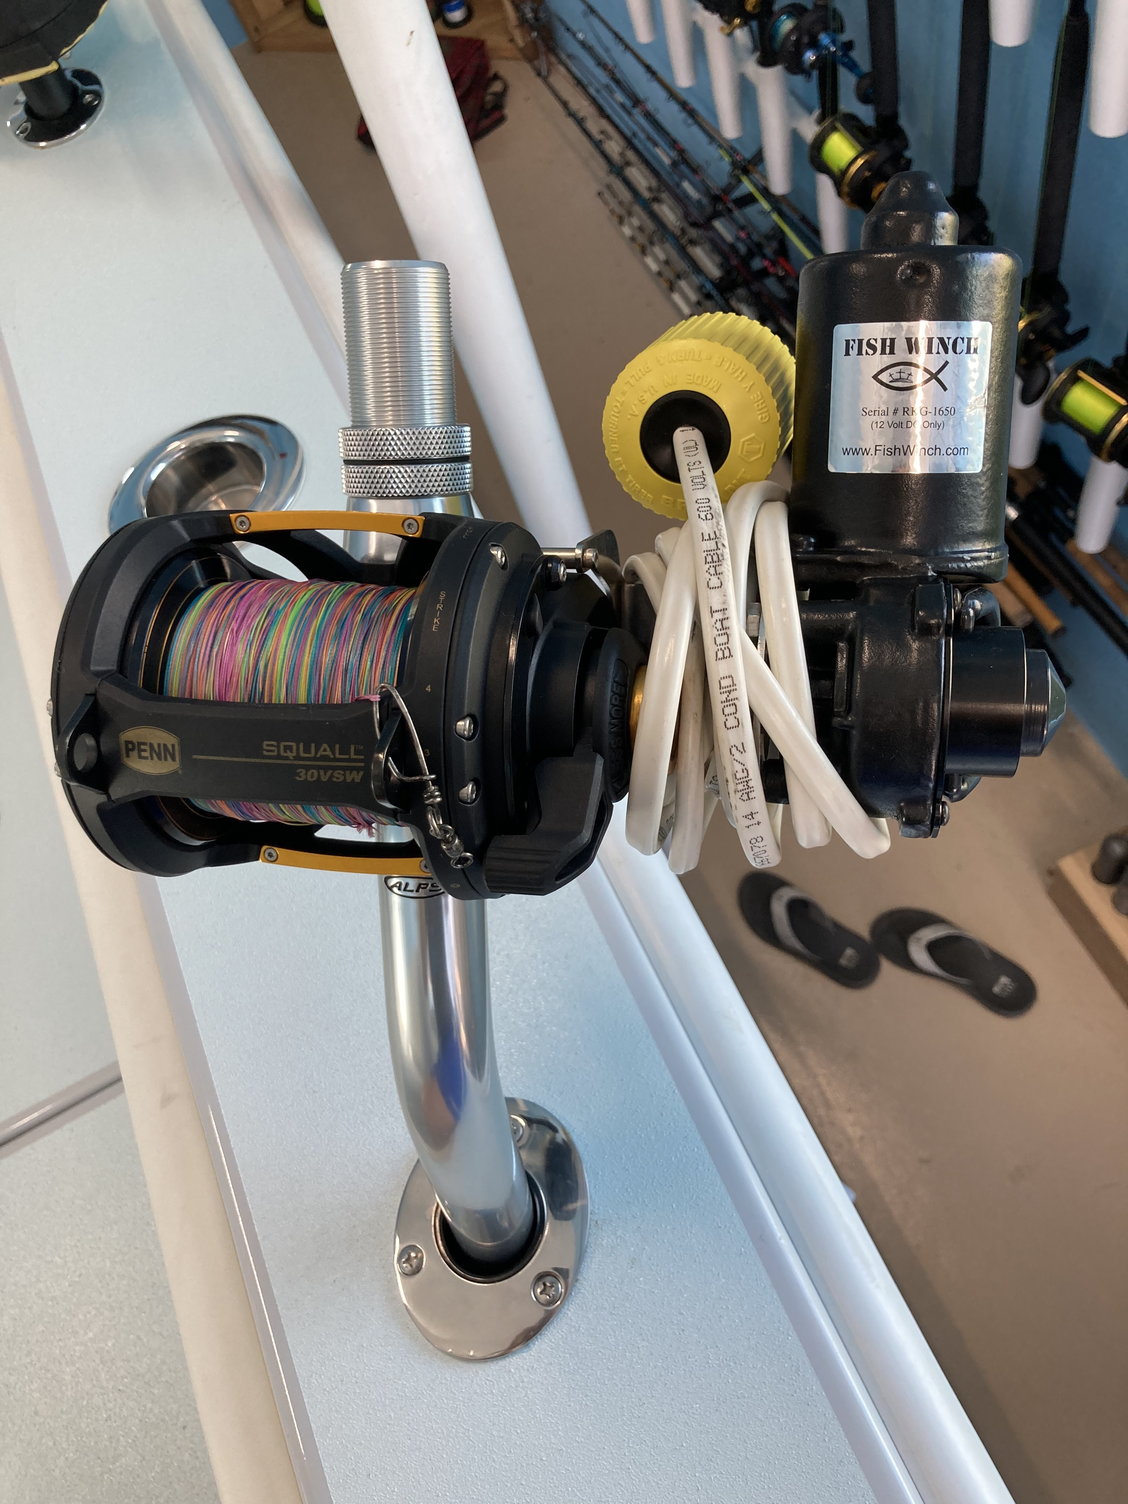 Fish Winch Electric Reel - The Hull Truth - Boating and Fishing Forum